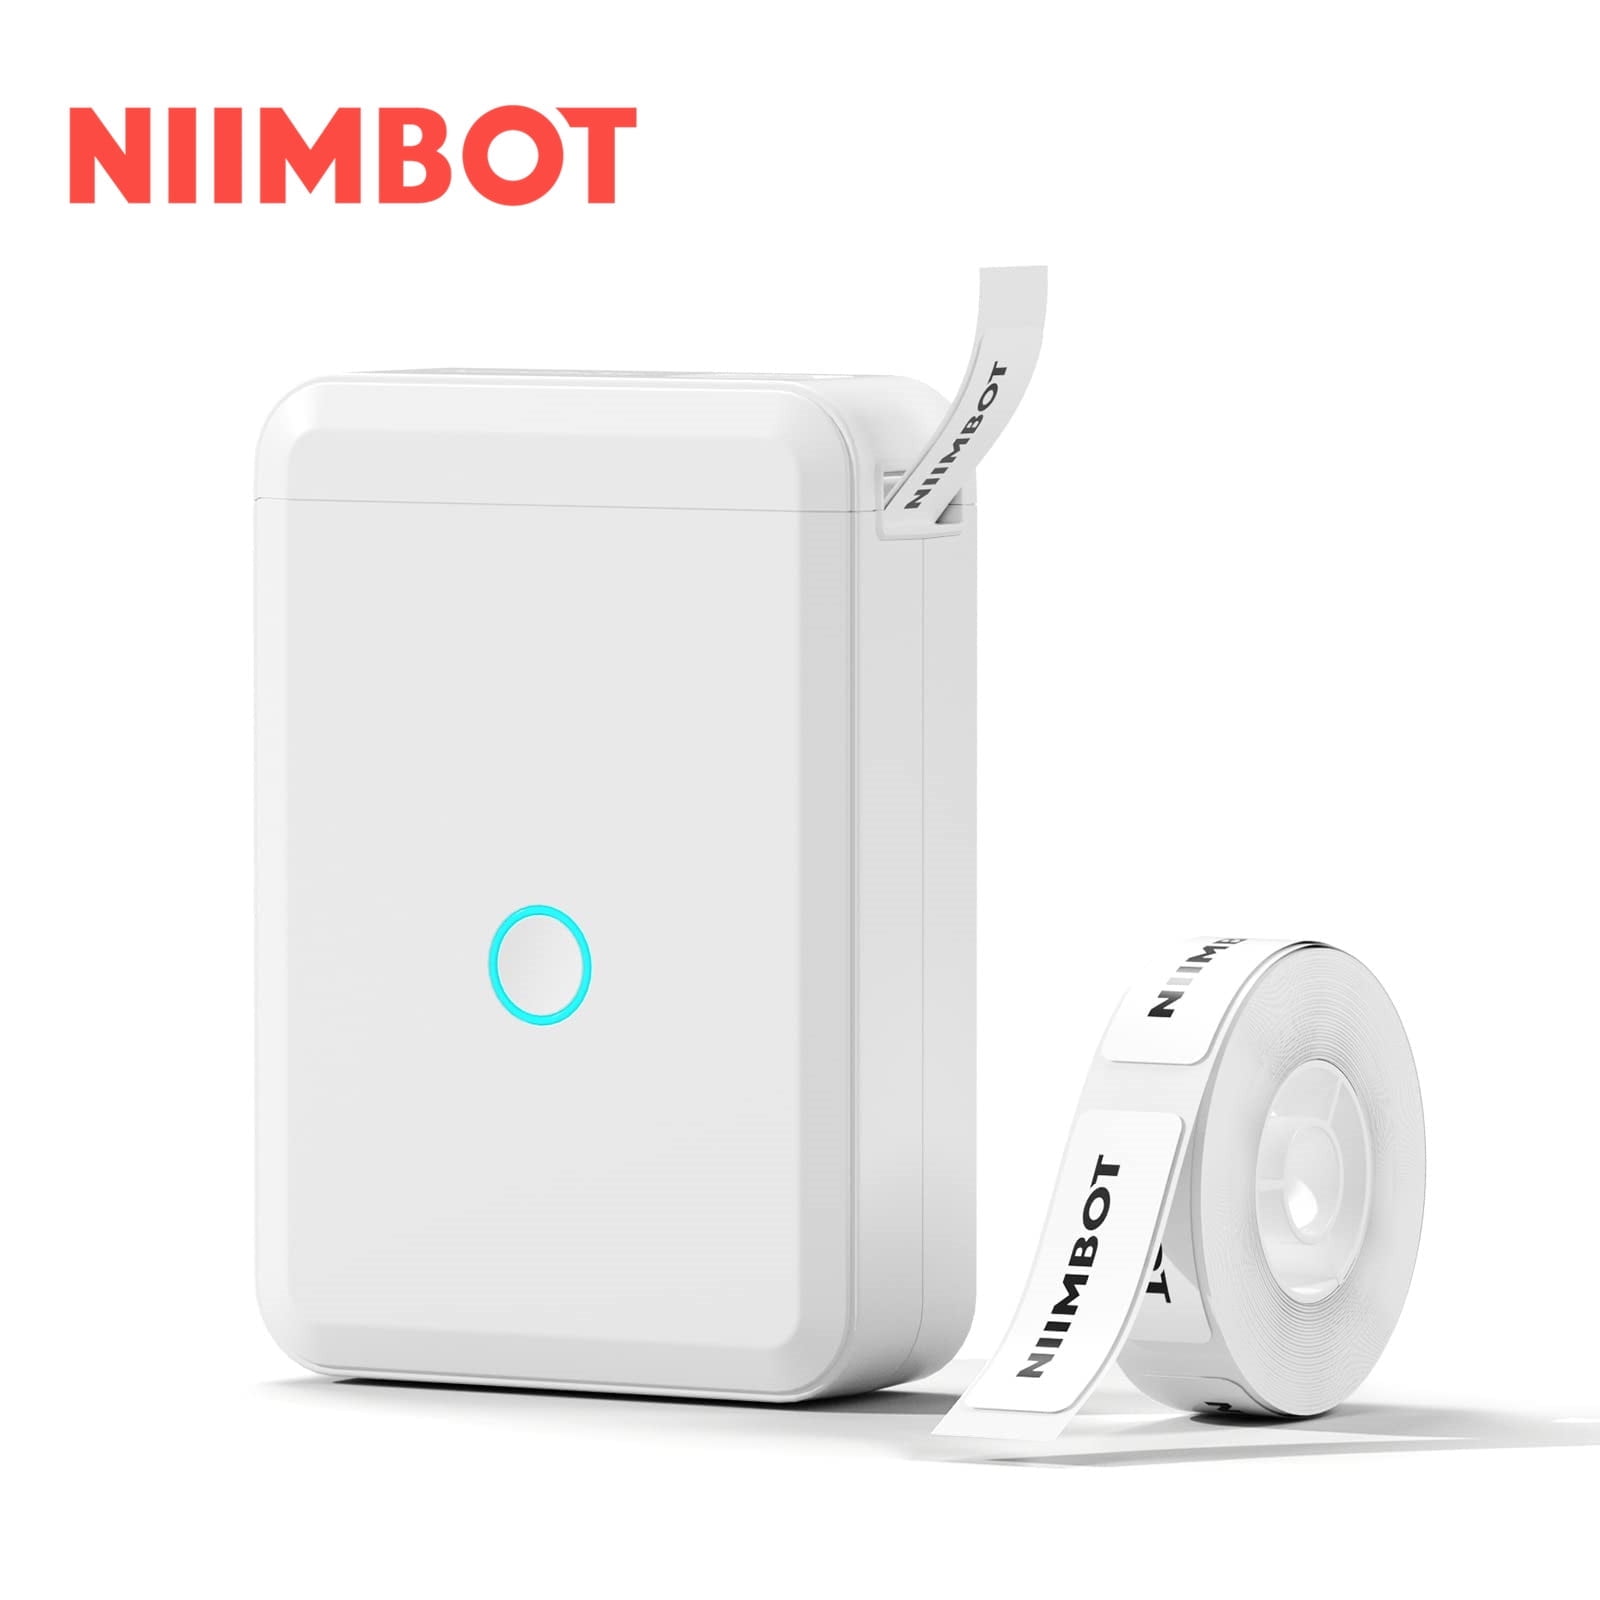 NIIMBOT B21 Label Maker Machine with 1 Roll Free Tape Vintage 2 inches  Width Business Thermal Printer Price Gun Shipping Label Tag Writer for Home